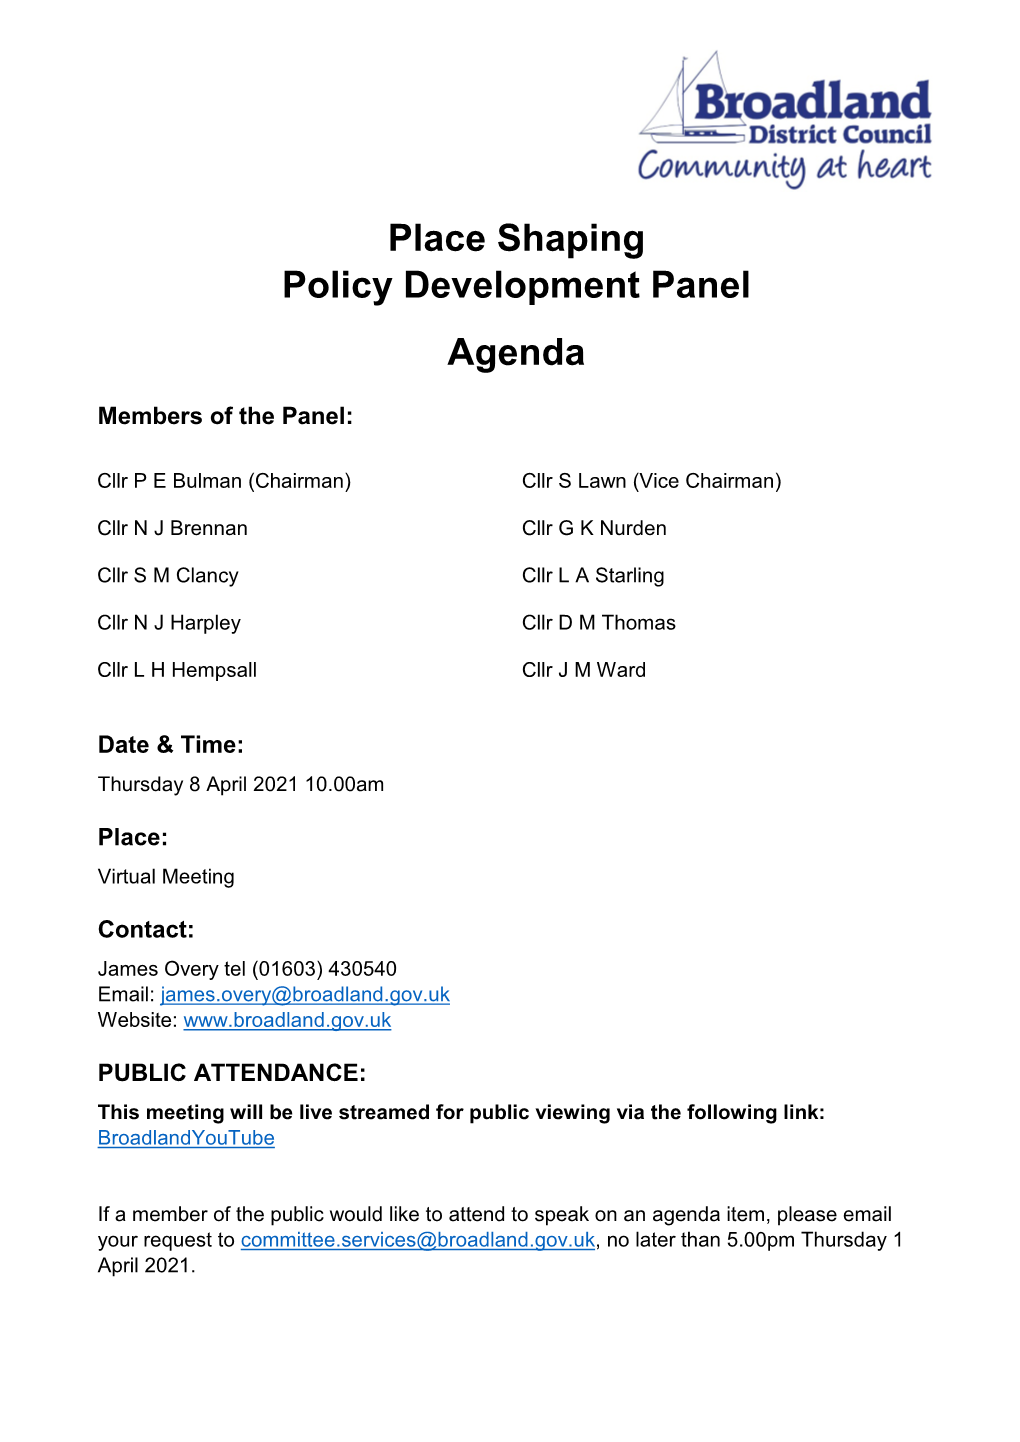 Place Shaping Policy Development Panel Agenda